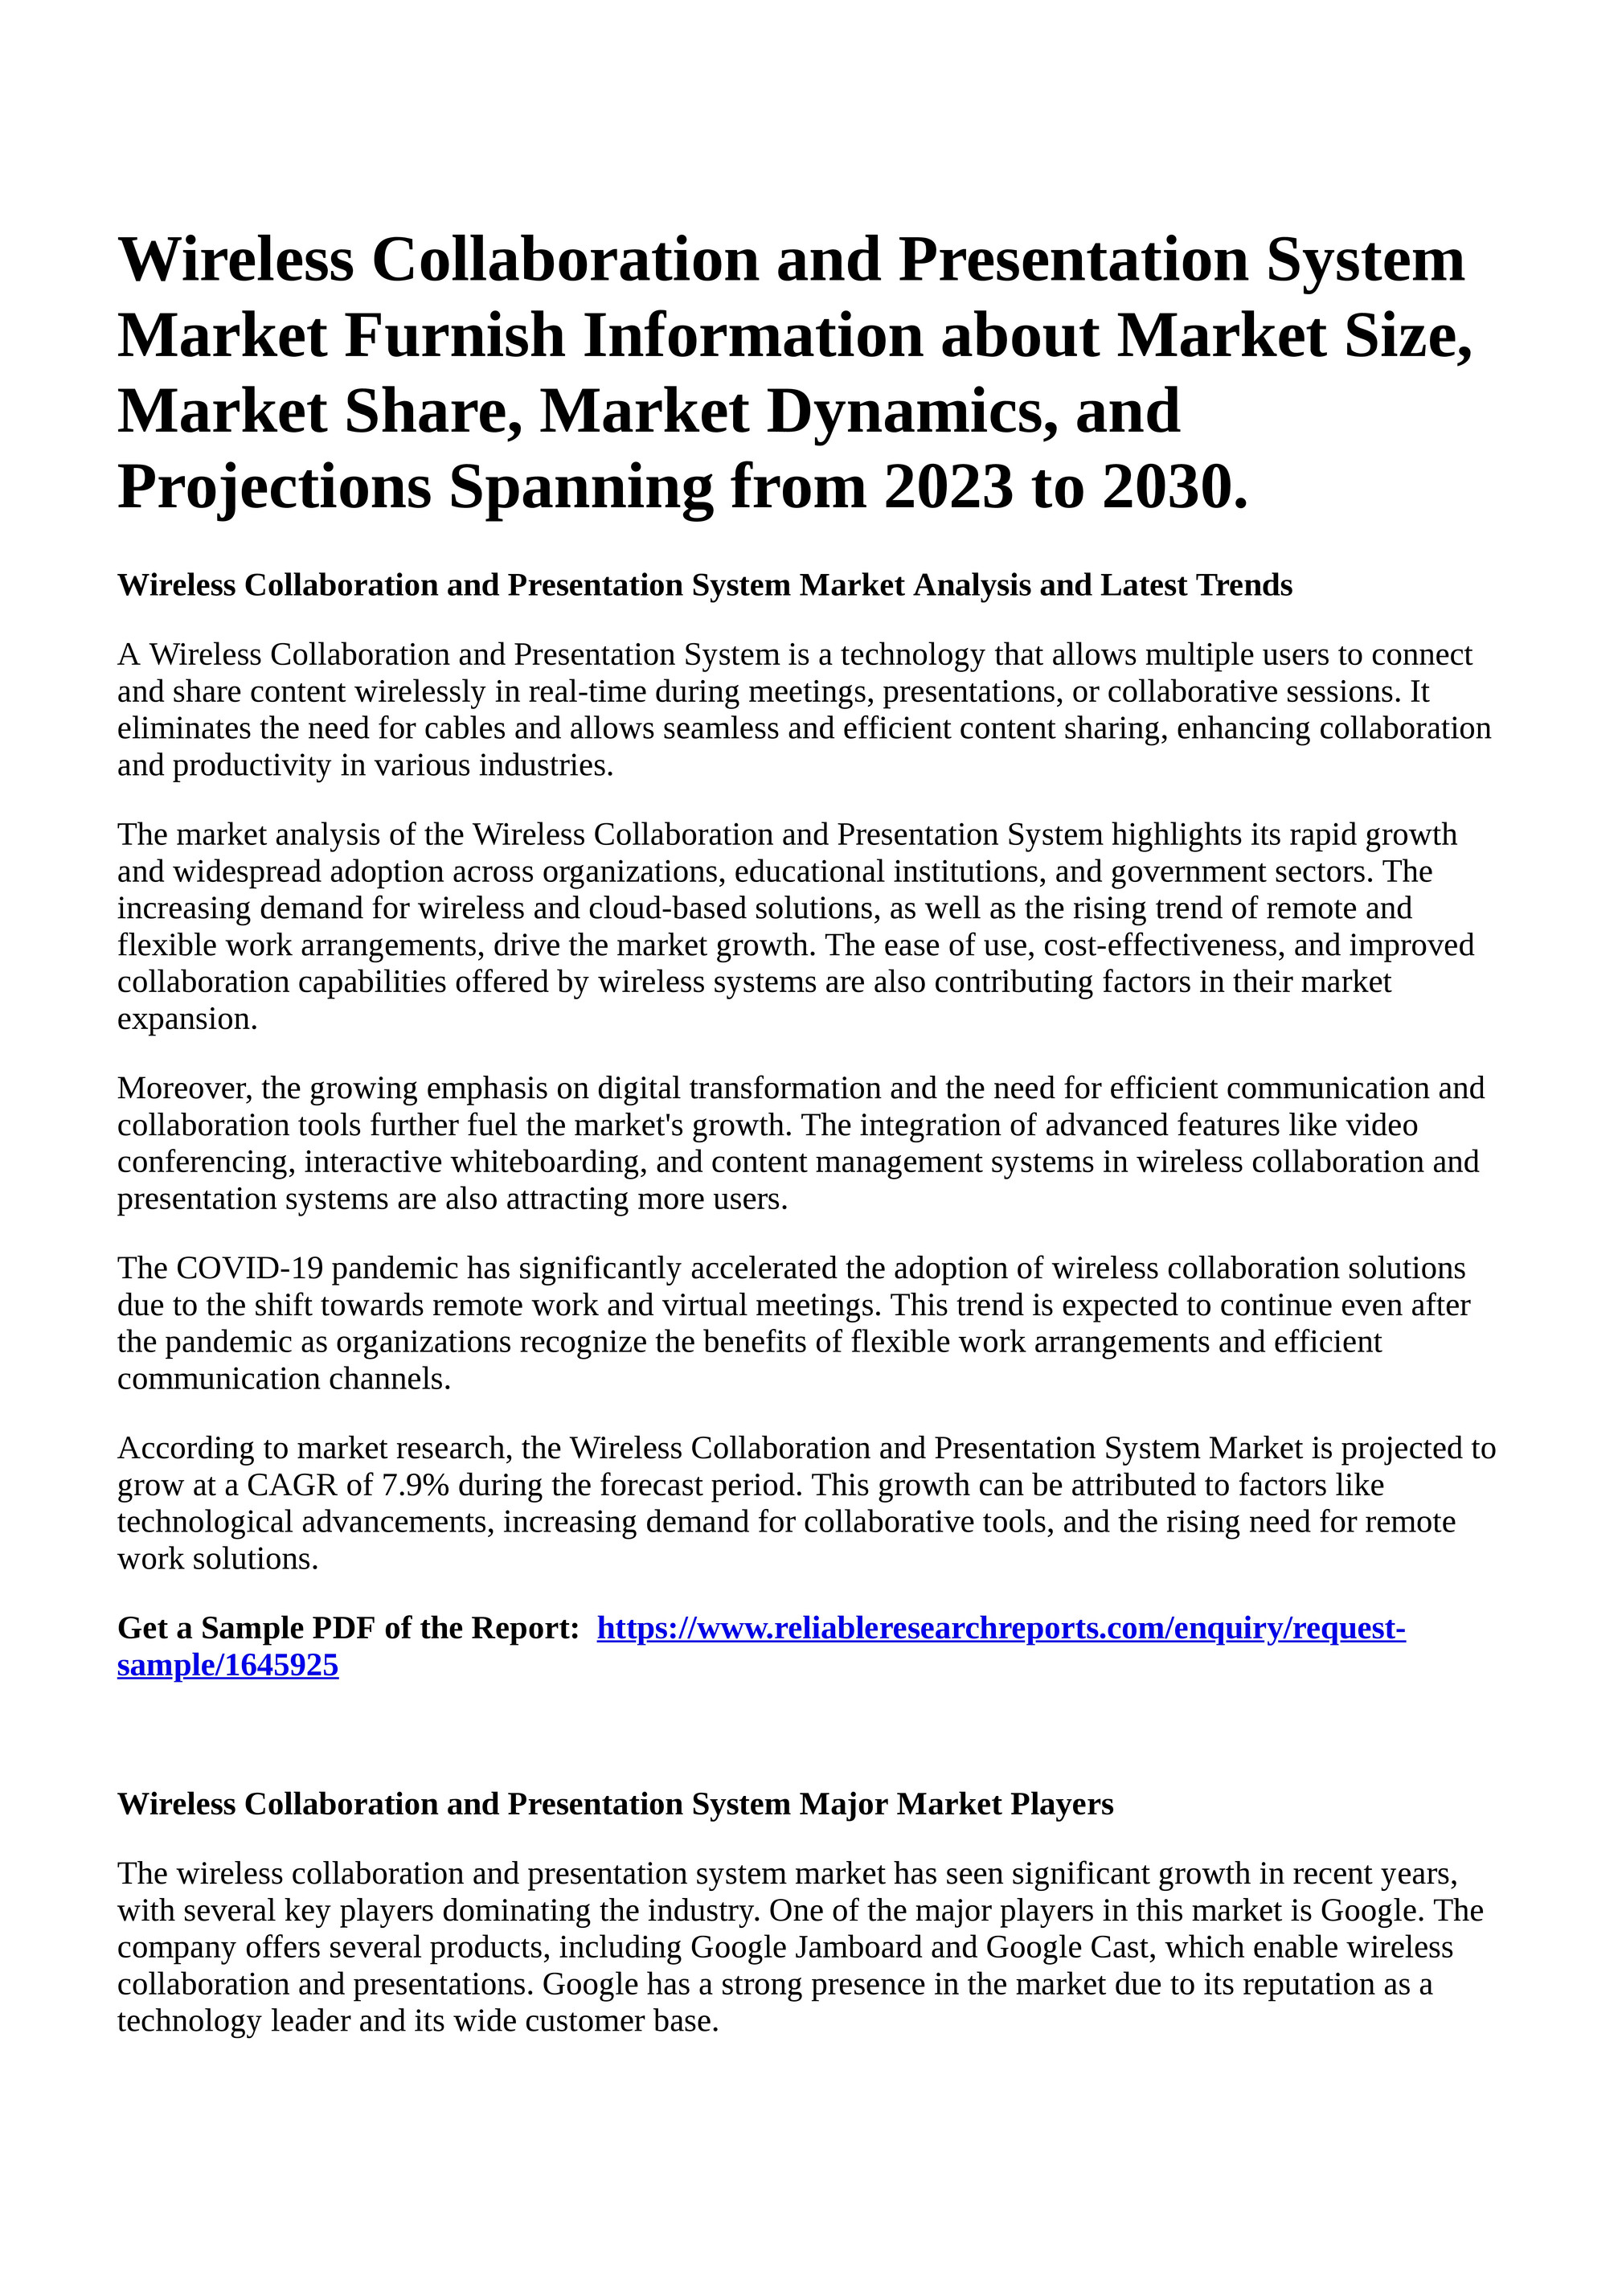 Reportprime - Wireless Collaboration and Presentation System Market Furnish  Information about Market Size, Market Share, Market Dynamics, and  Projections Spanning from 2023 to 2030. - Page 1